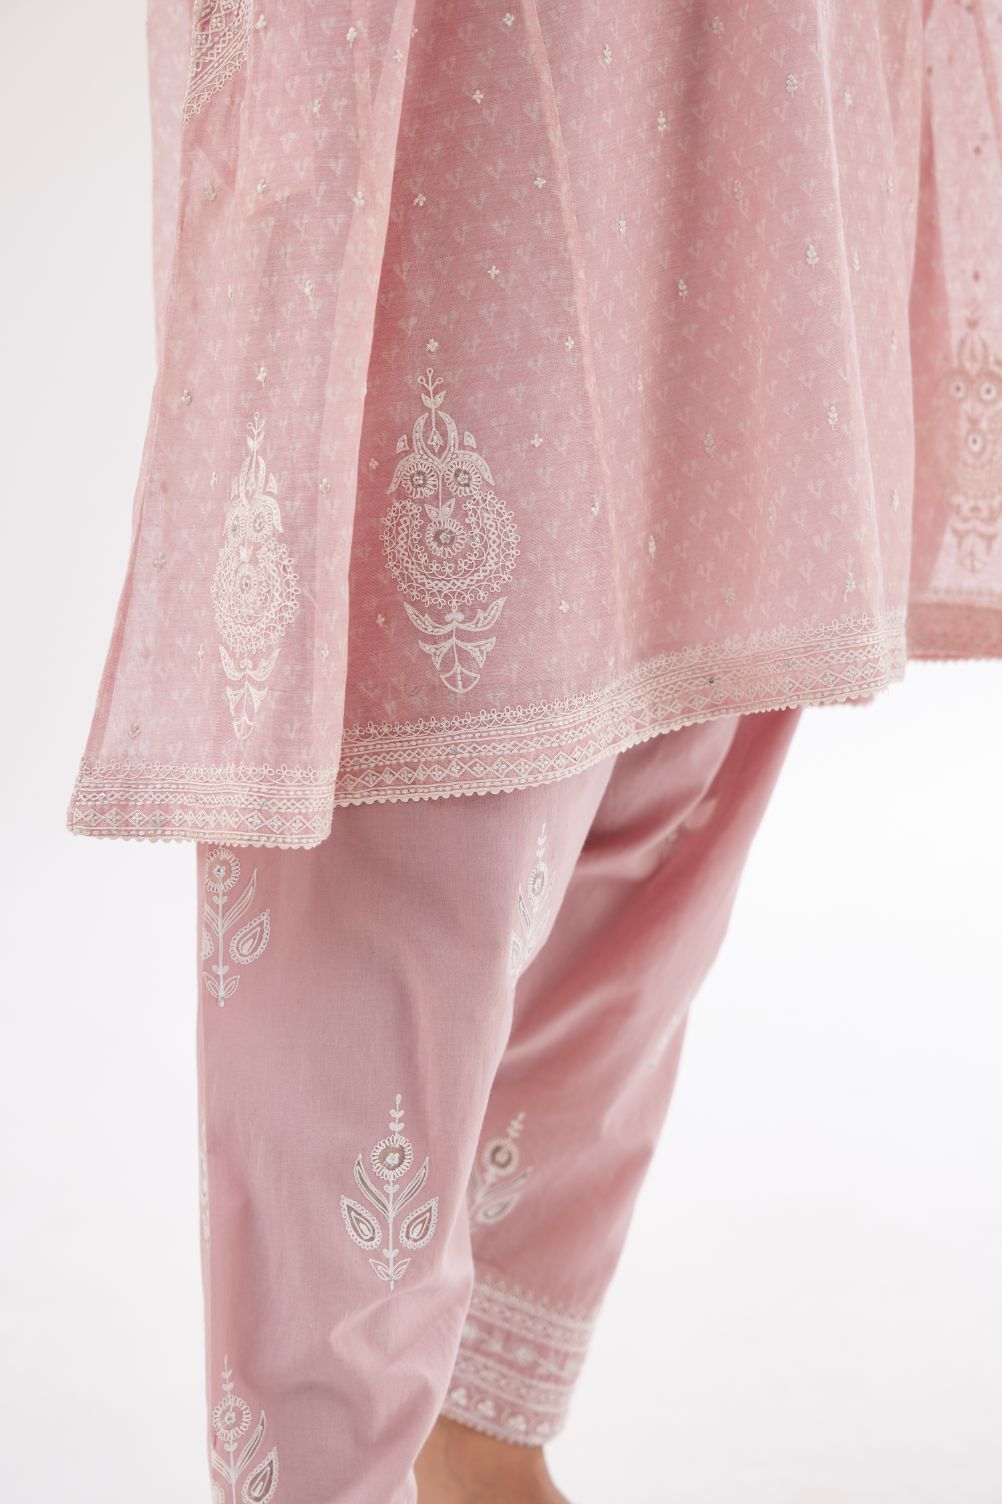 Pink cotton chanderi hand block printed short kalidar phiran style kurta set with button placket neckline and dori and silk thraed embroidery all over.